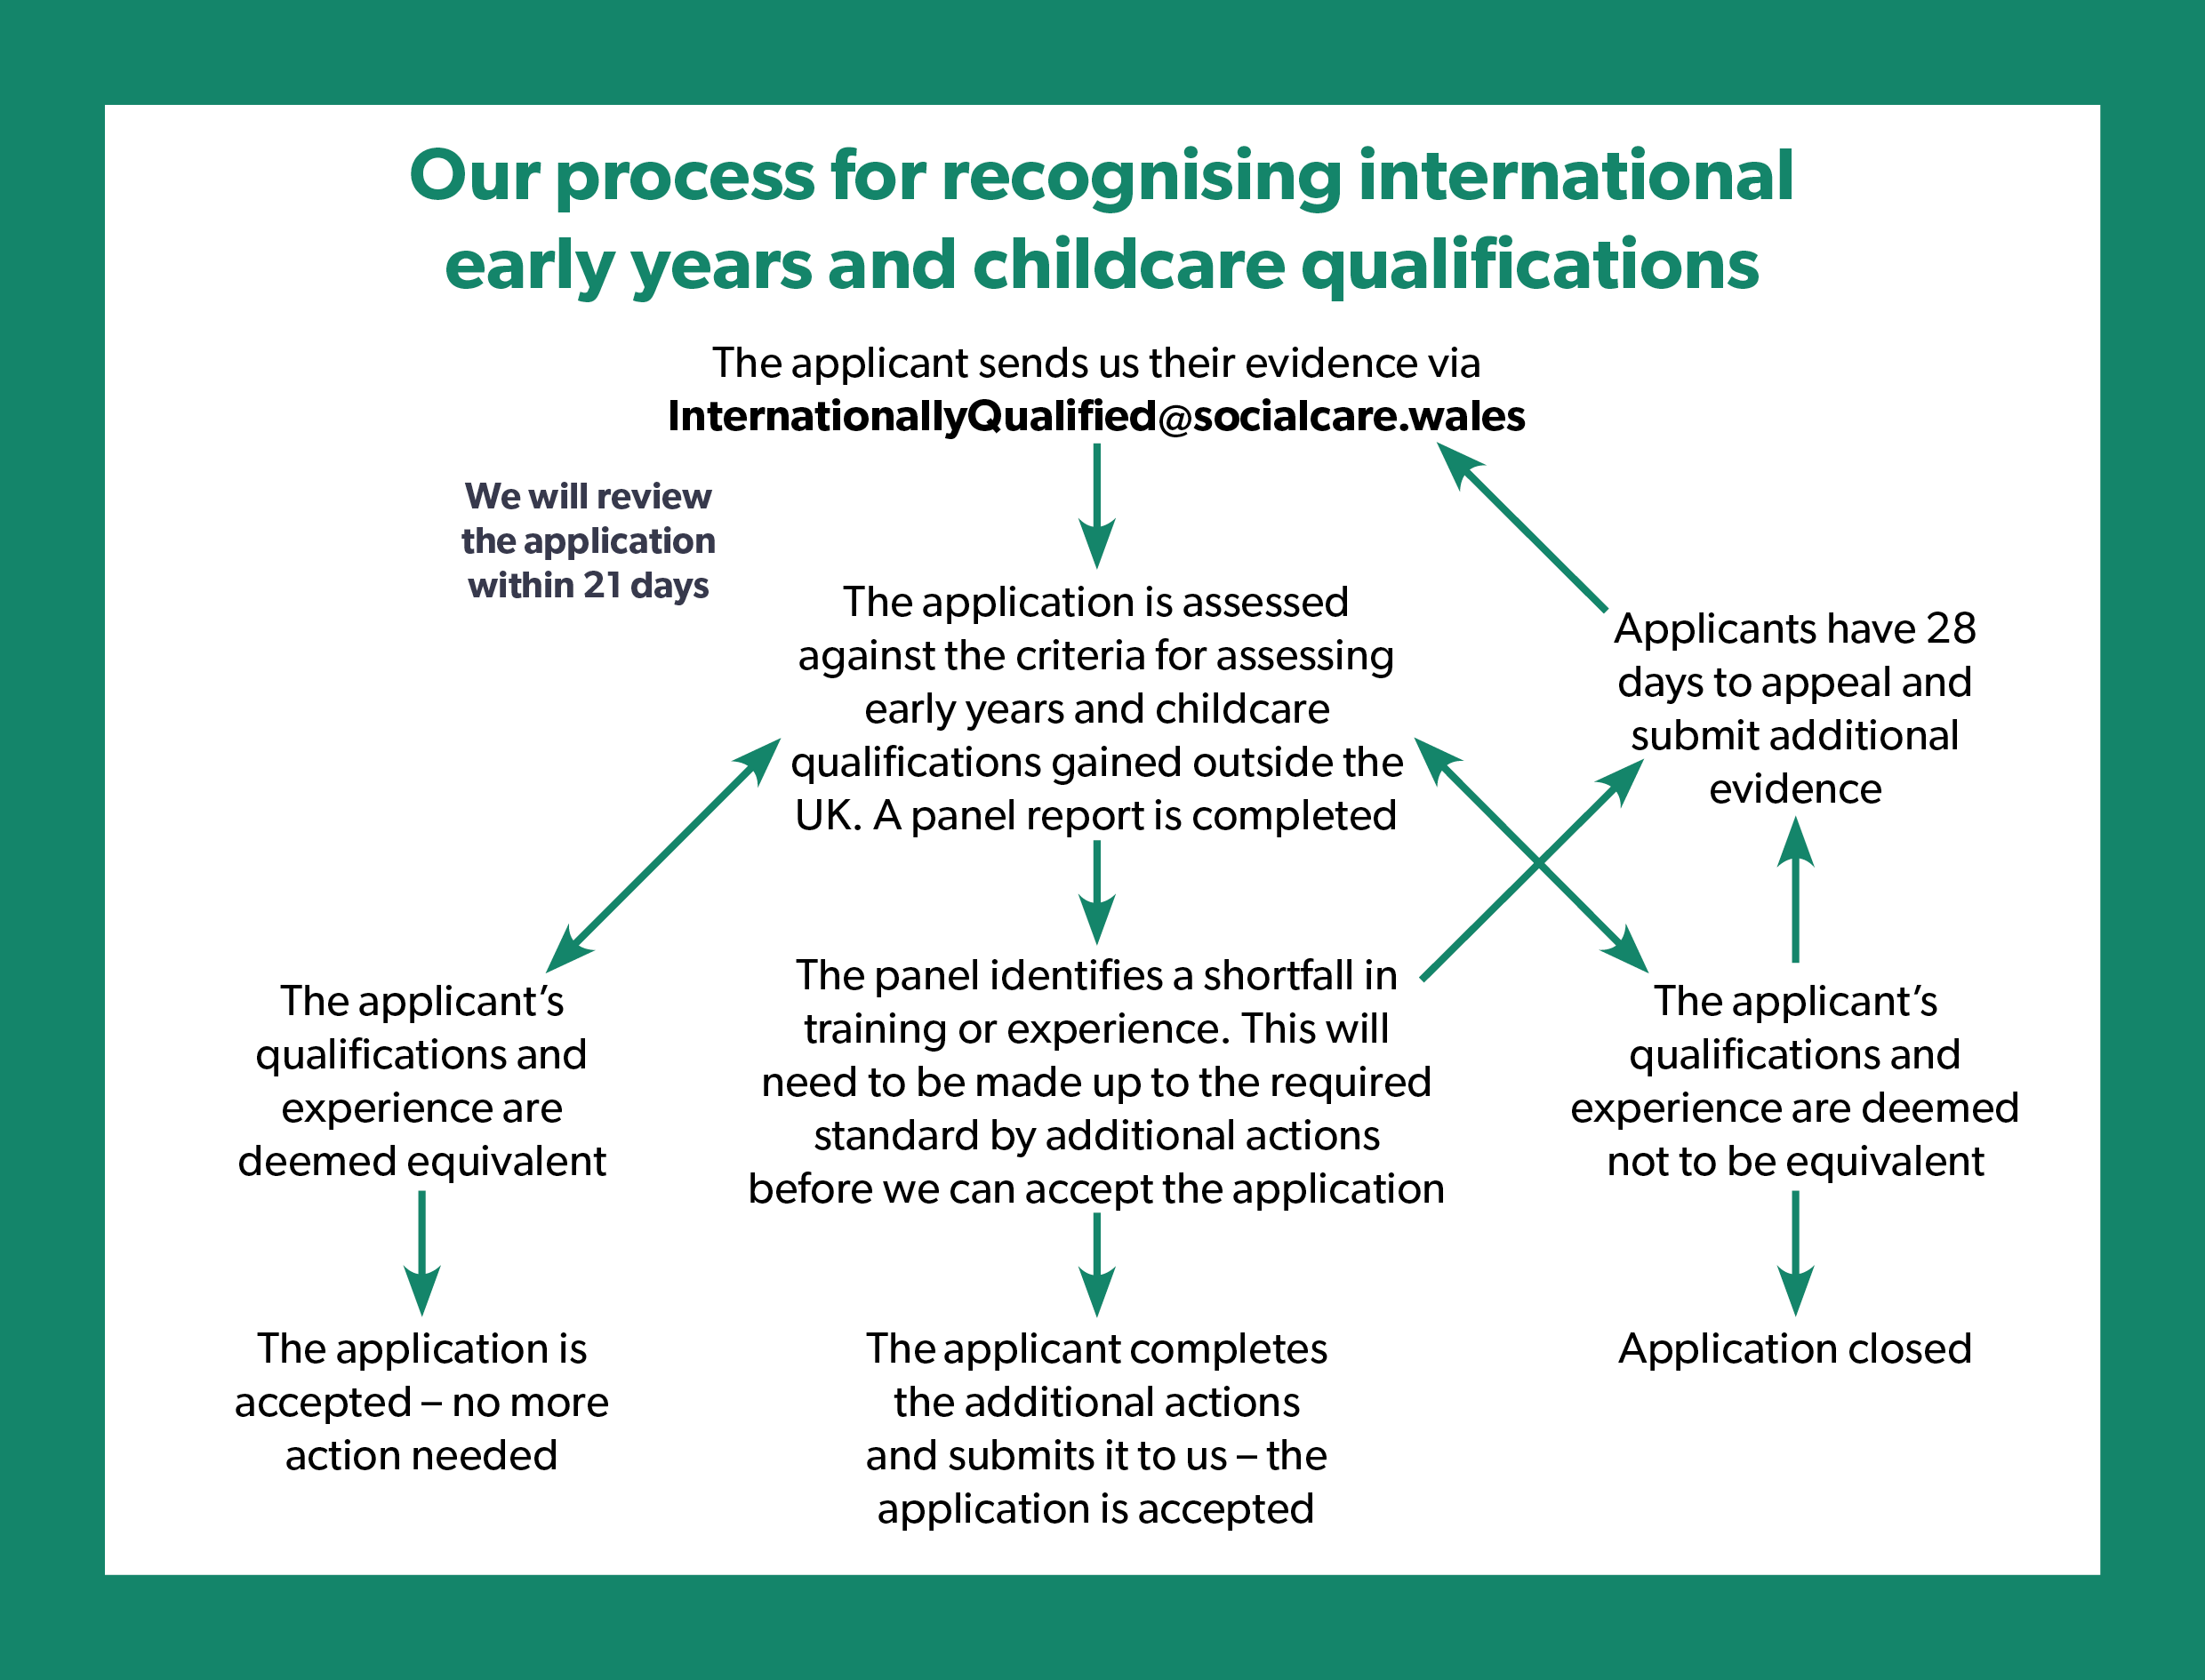 Our process for recognising international early years and childcare qualifications.